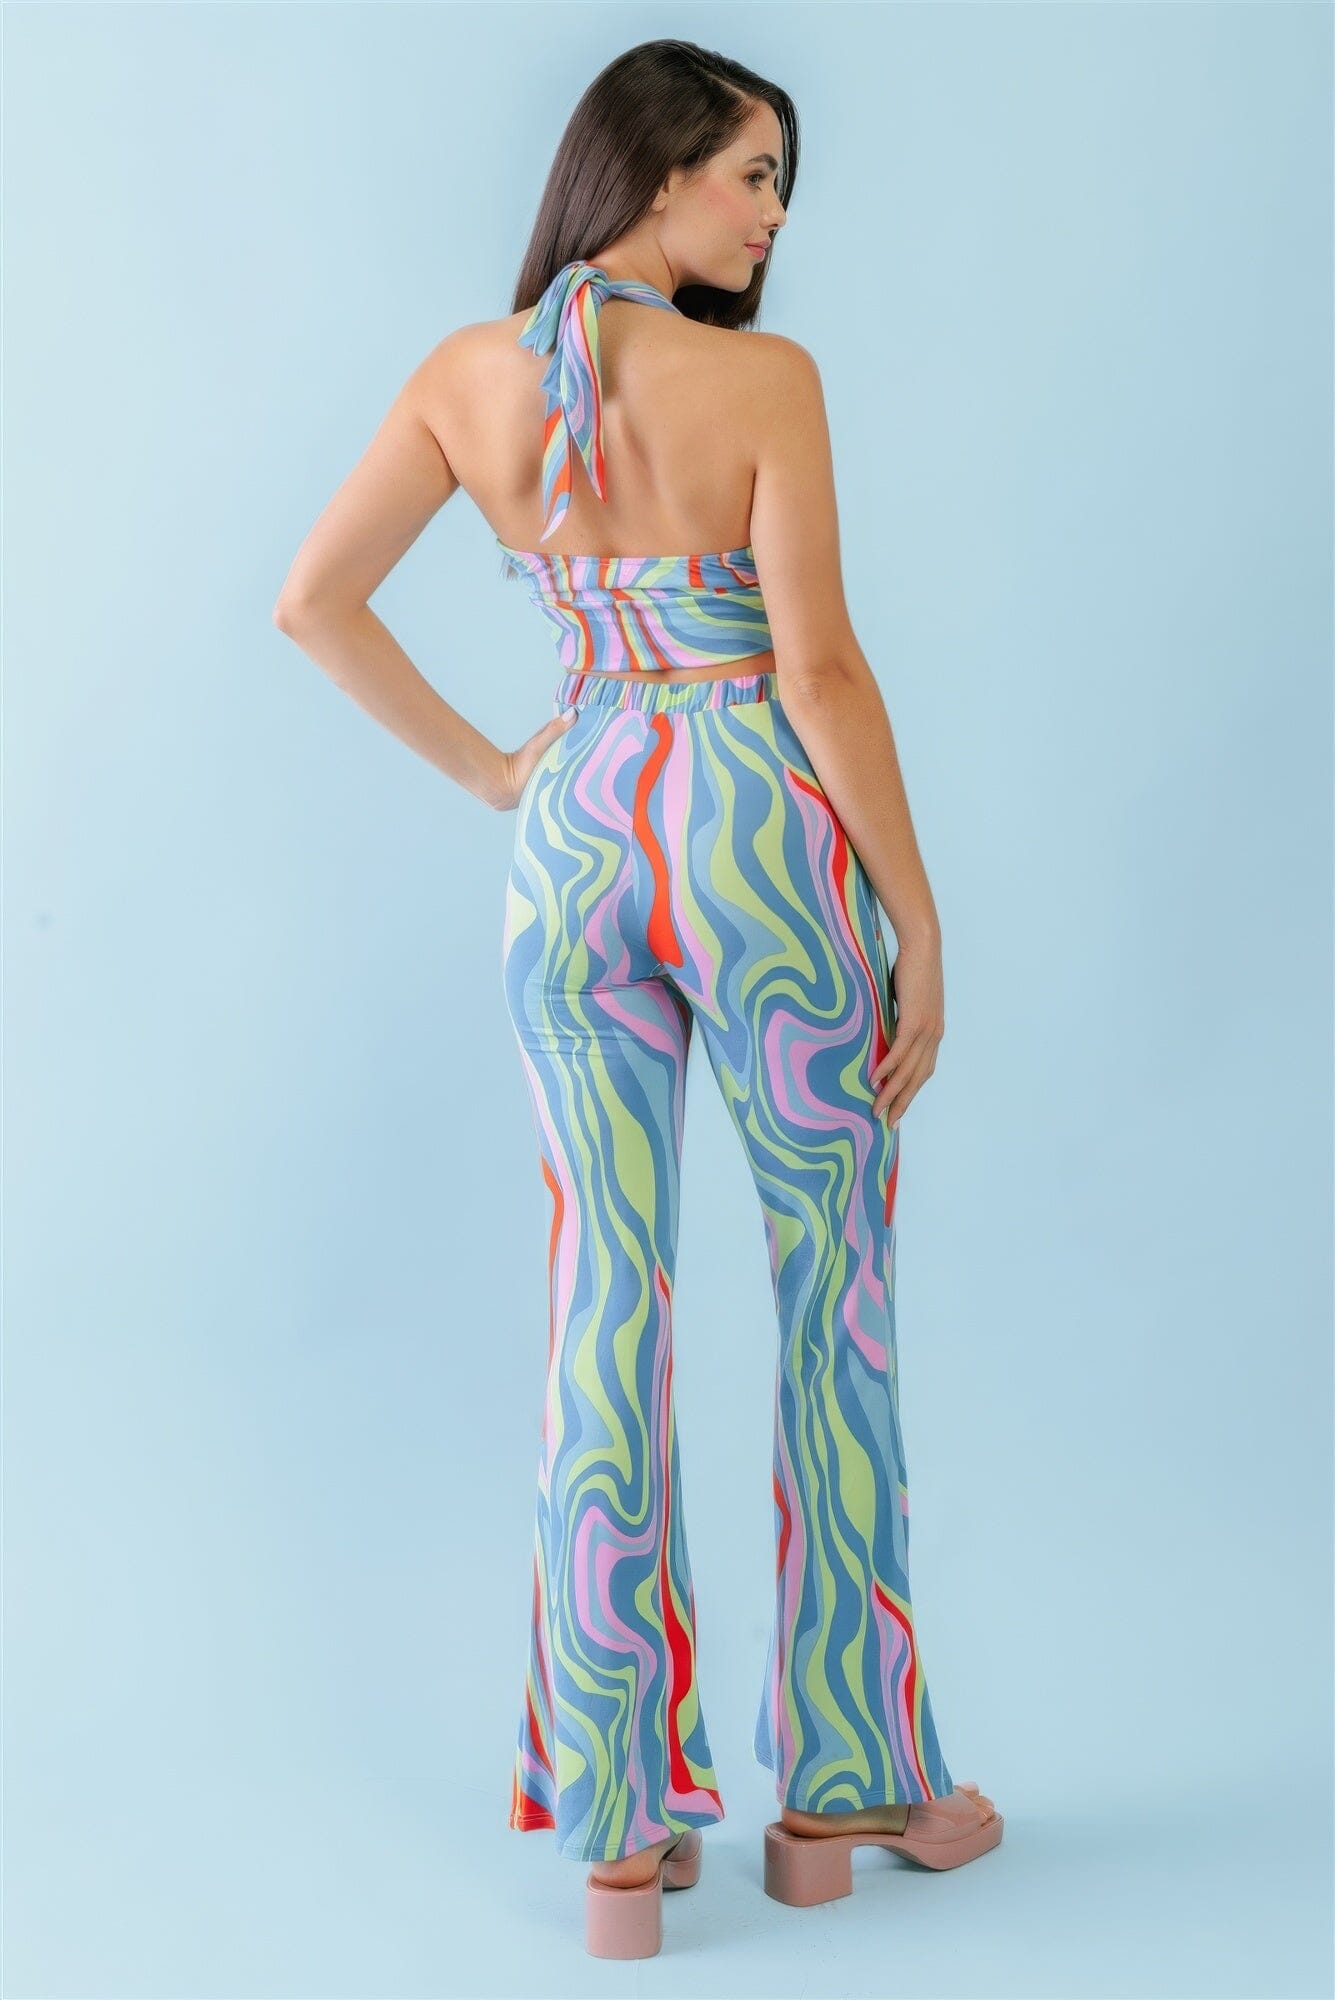 Multicolor Abstract Print Halter V-neck Ruched Open Back Crop Top & High Waist Pants Outfit Set Outfit Sets jehouze 